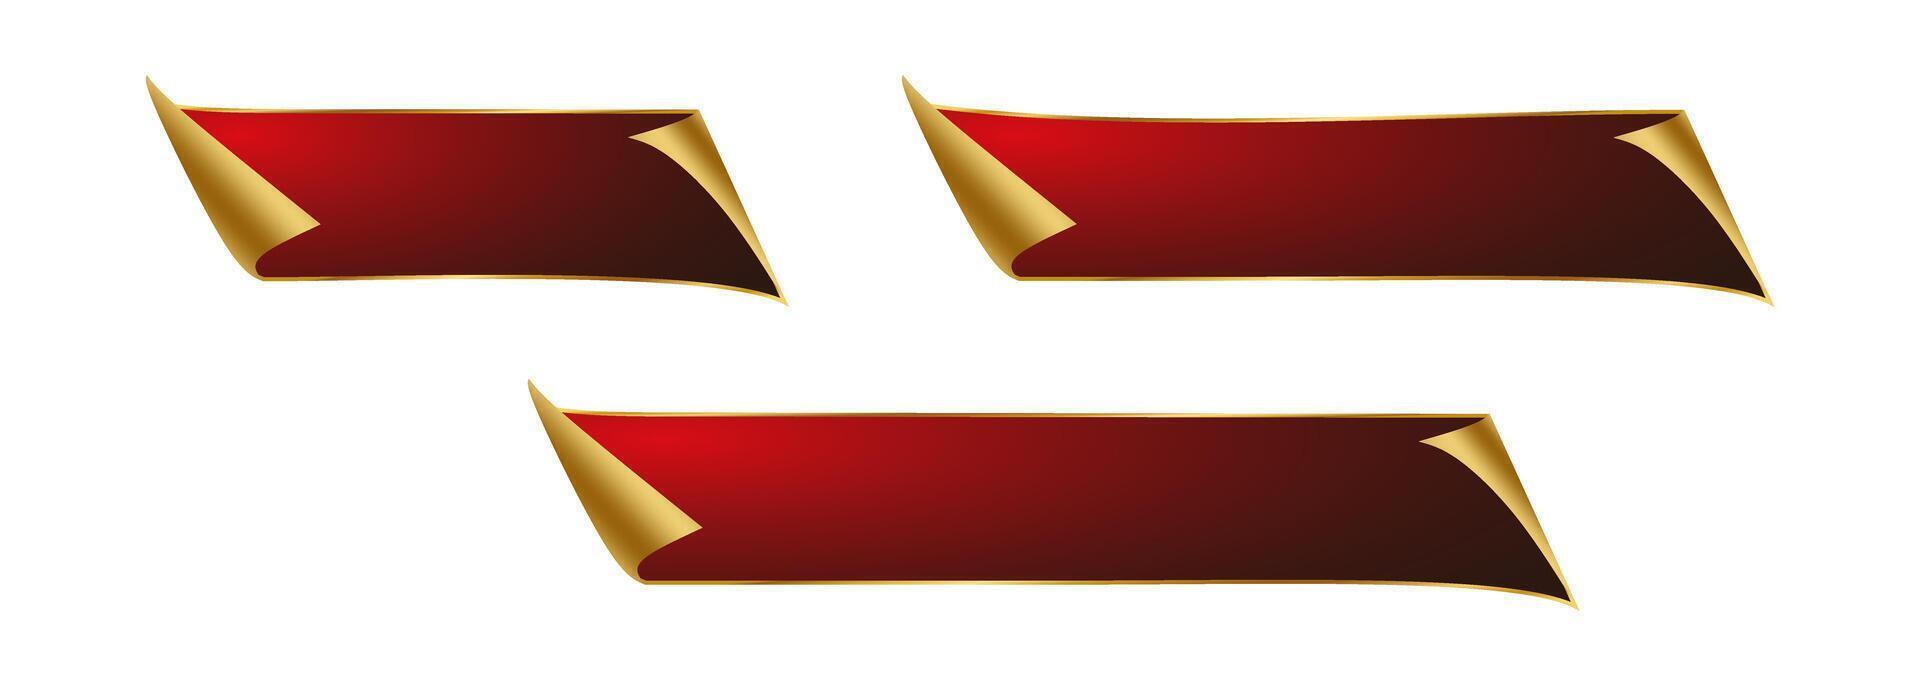 Set red and gold ribbon banner over white background vector